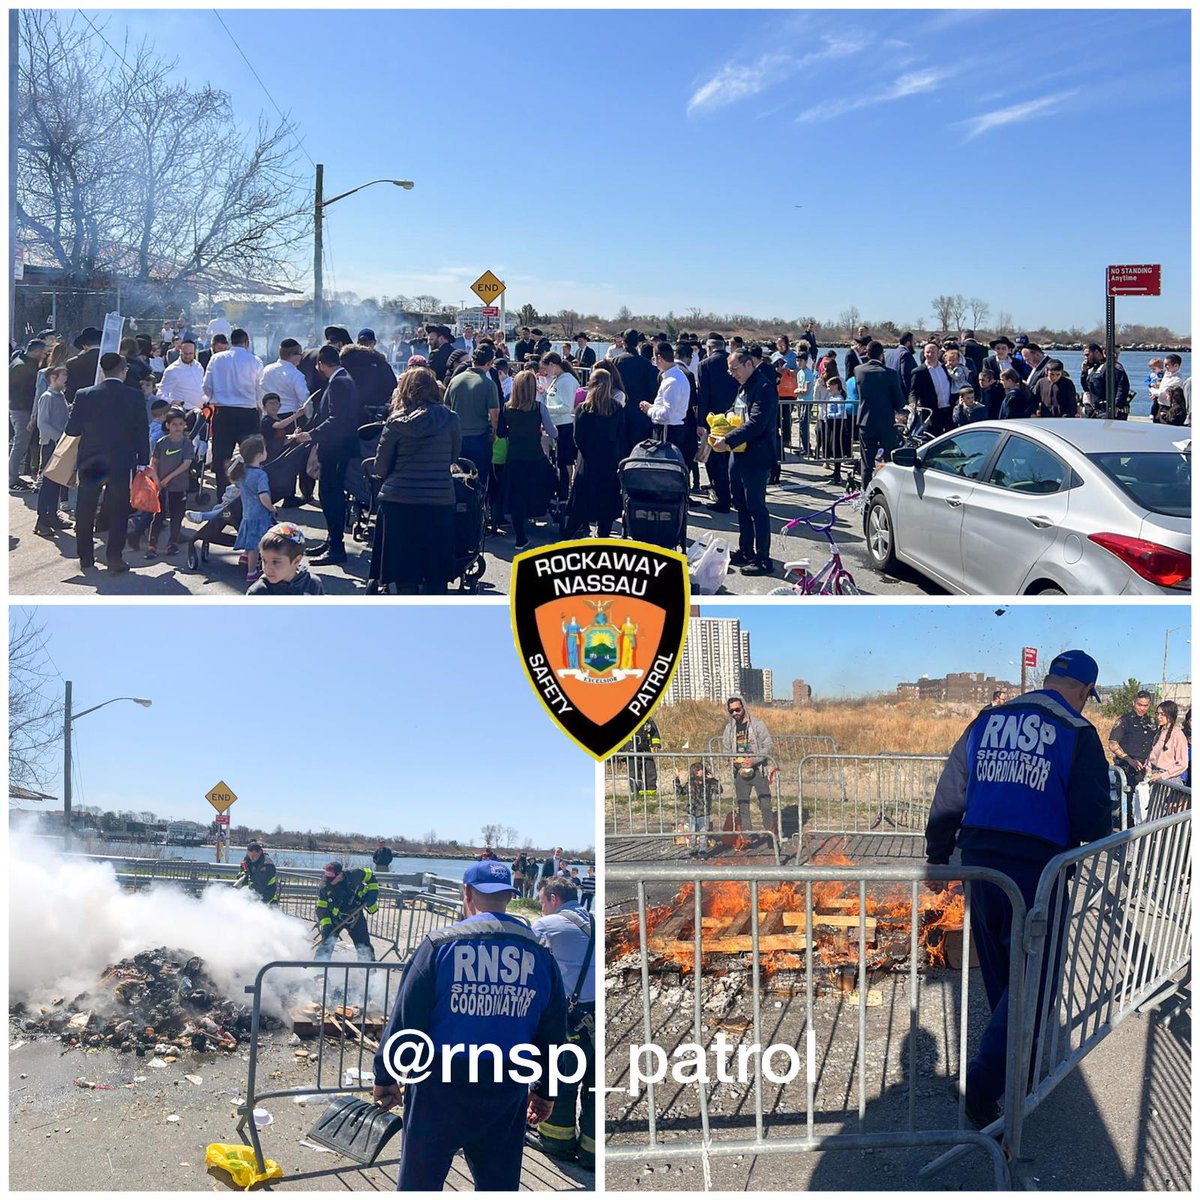 🗣 #ShoutOut to @JCCofRP, @AchiezerFR_5T, @NYPD101Pct, @NassauCountyPD, @NYCSanitation, @FDNY, #LCFD, #WFD, #IFD, @LawrenceVillage, & @HempsteadTown 
for joining together to assist the #community prior to #Passover2022 with the #ChametzBurning &  sanitation pickup. Thank You 🙏.